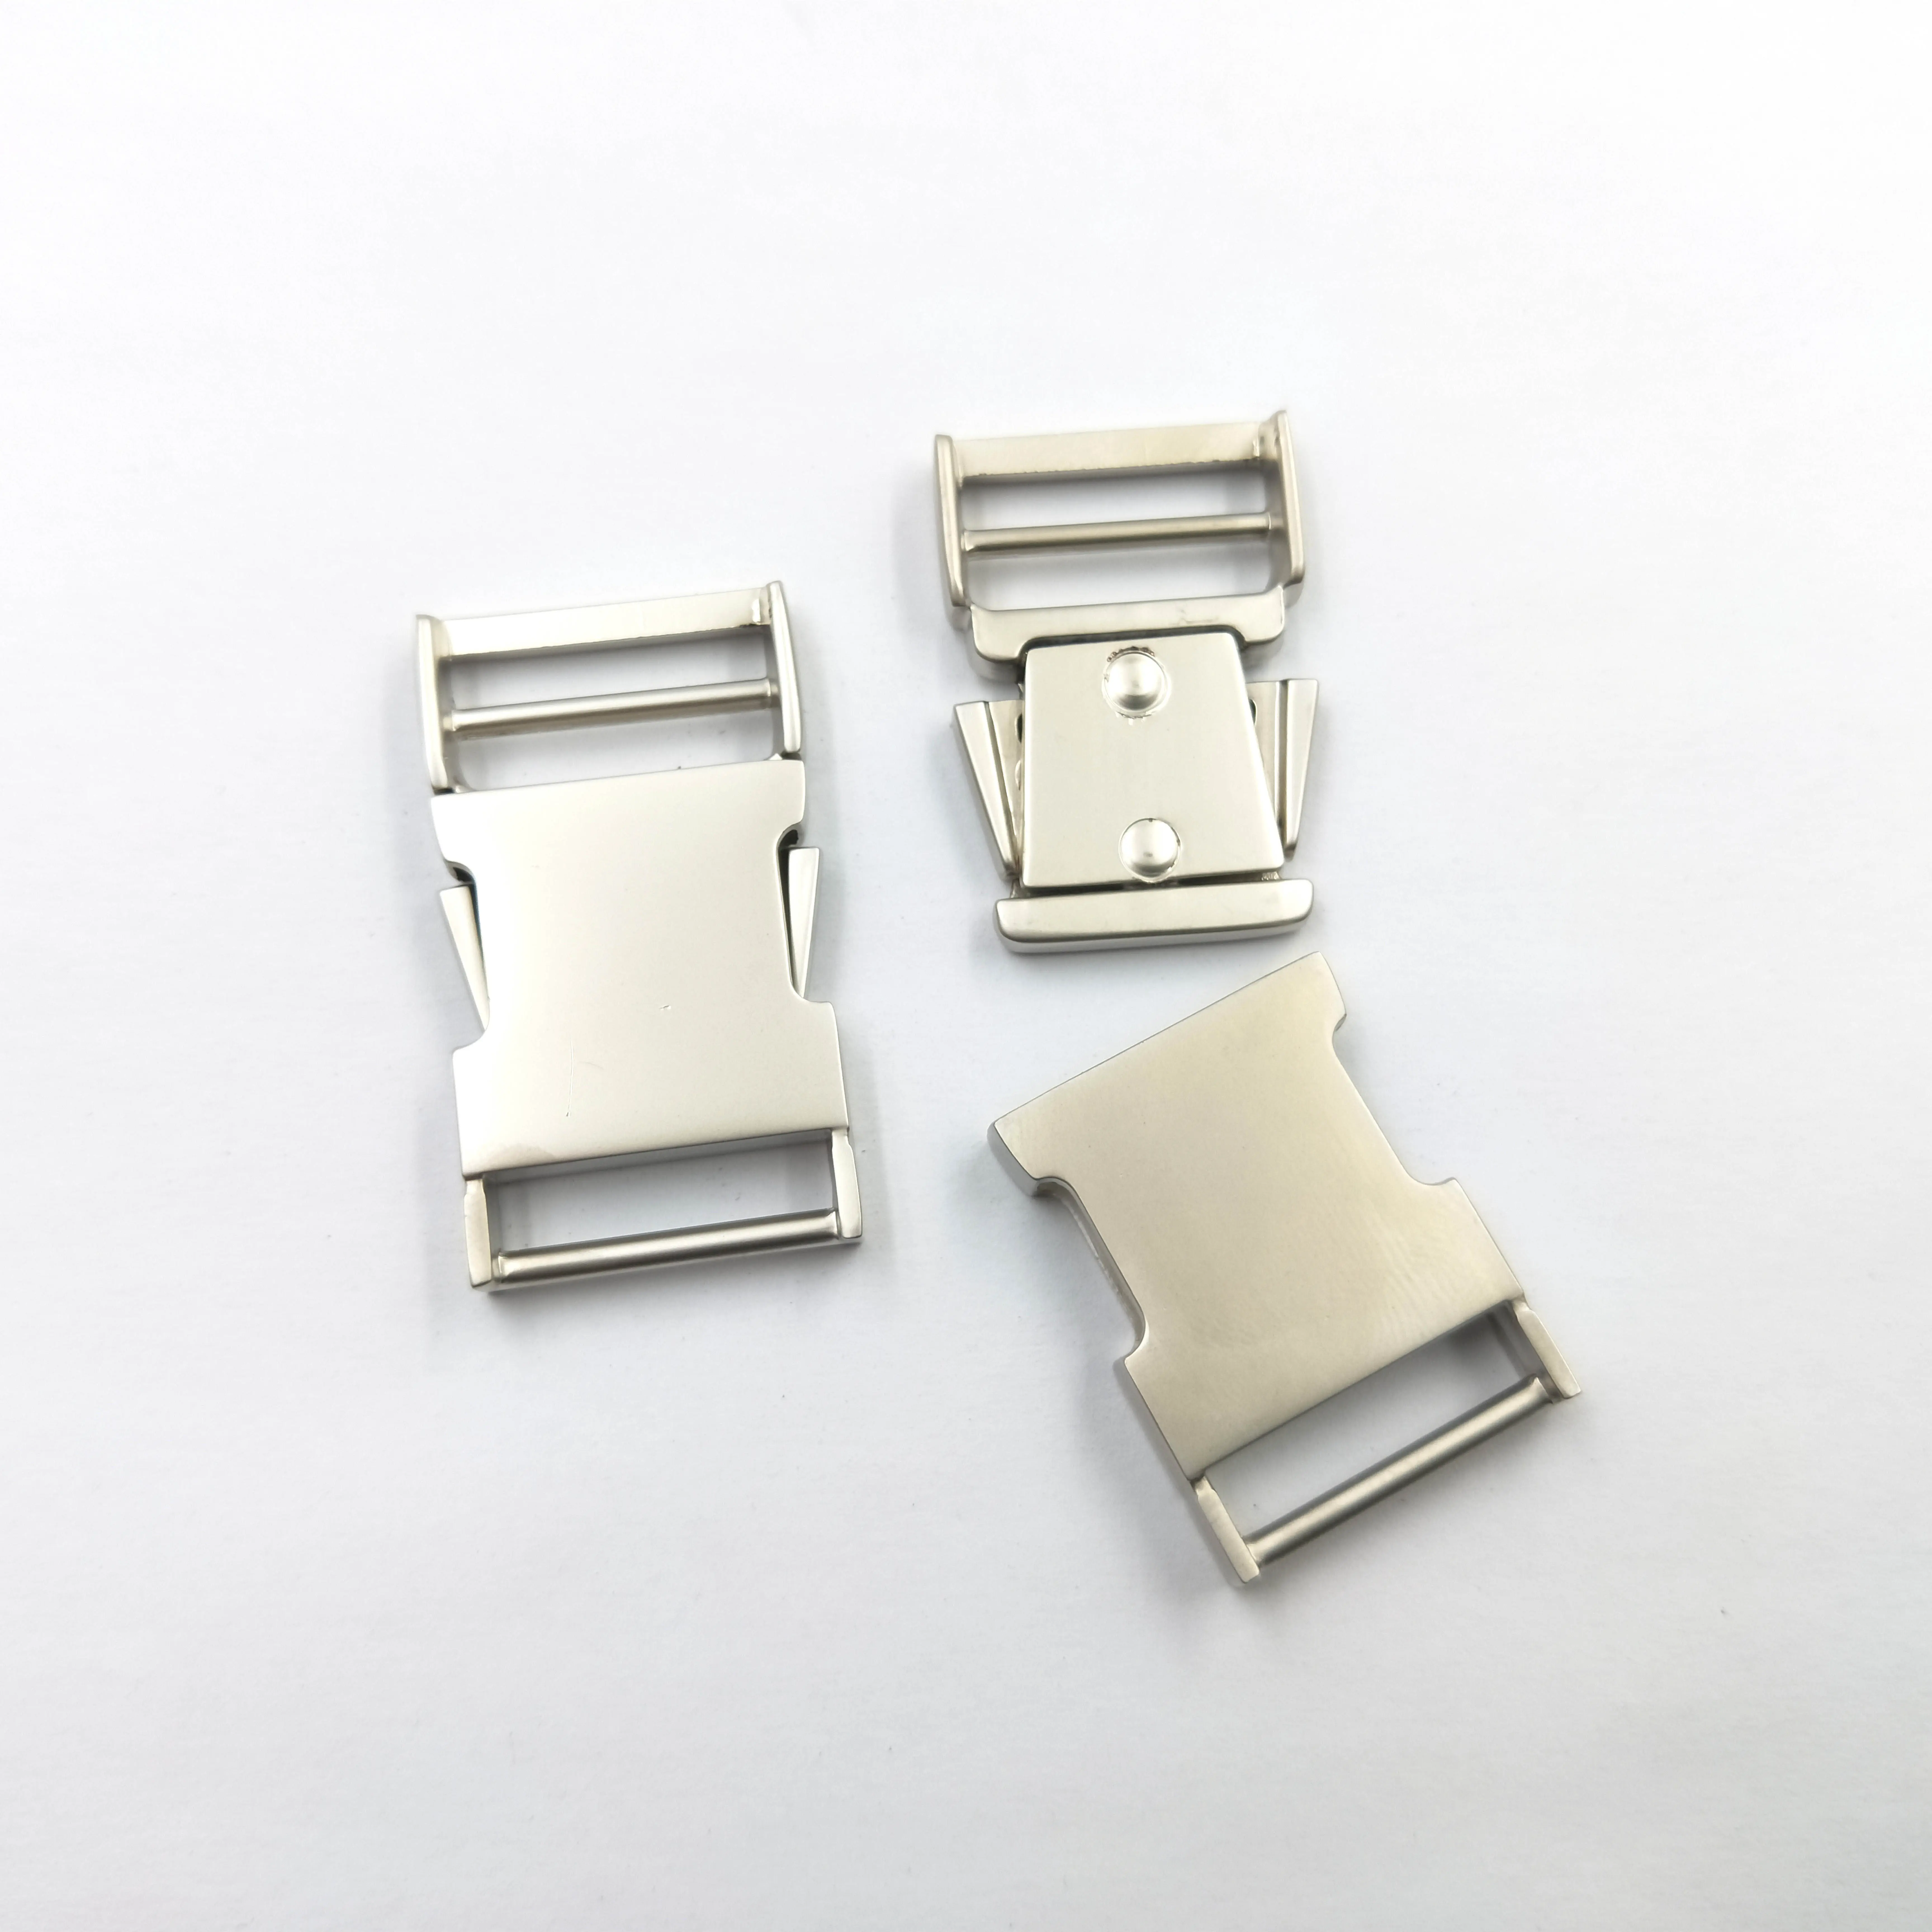 Metal Buckle Nickle Free Silver 20mm Metal Strap Mini Buckle For Bags/clothes/belt